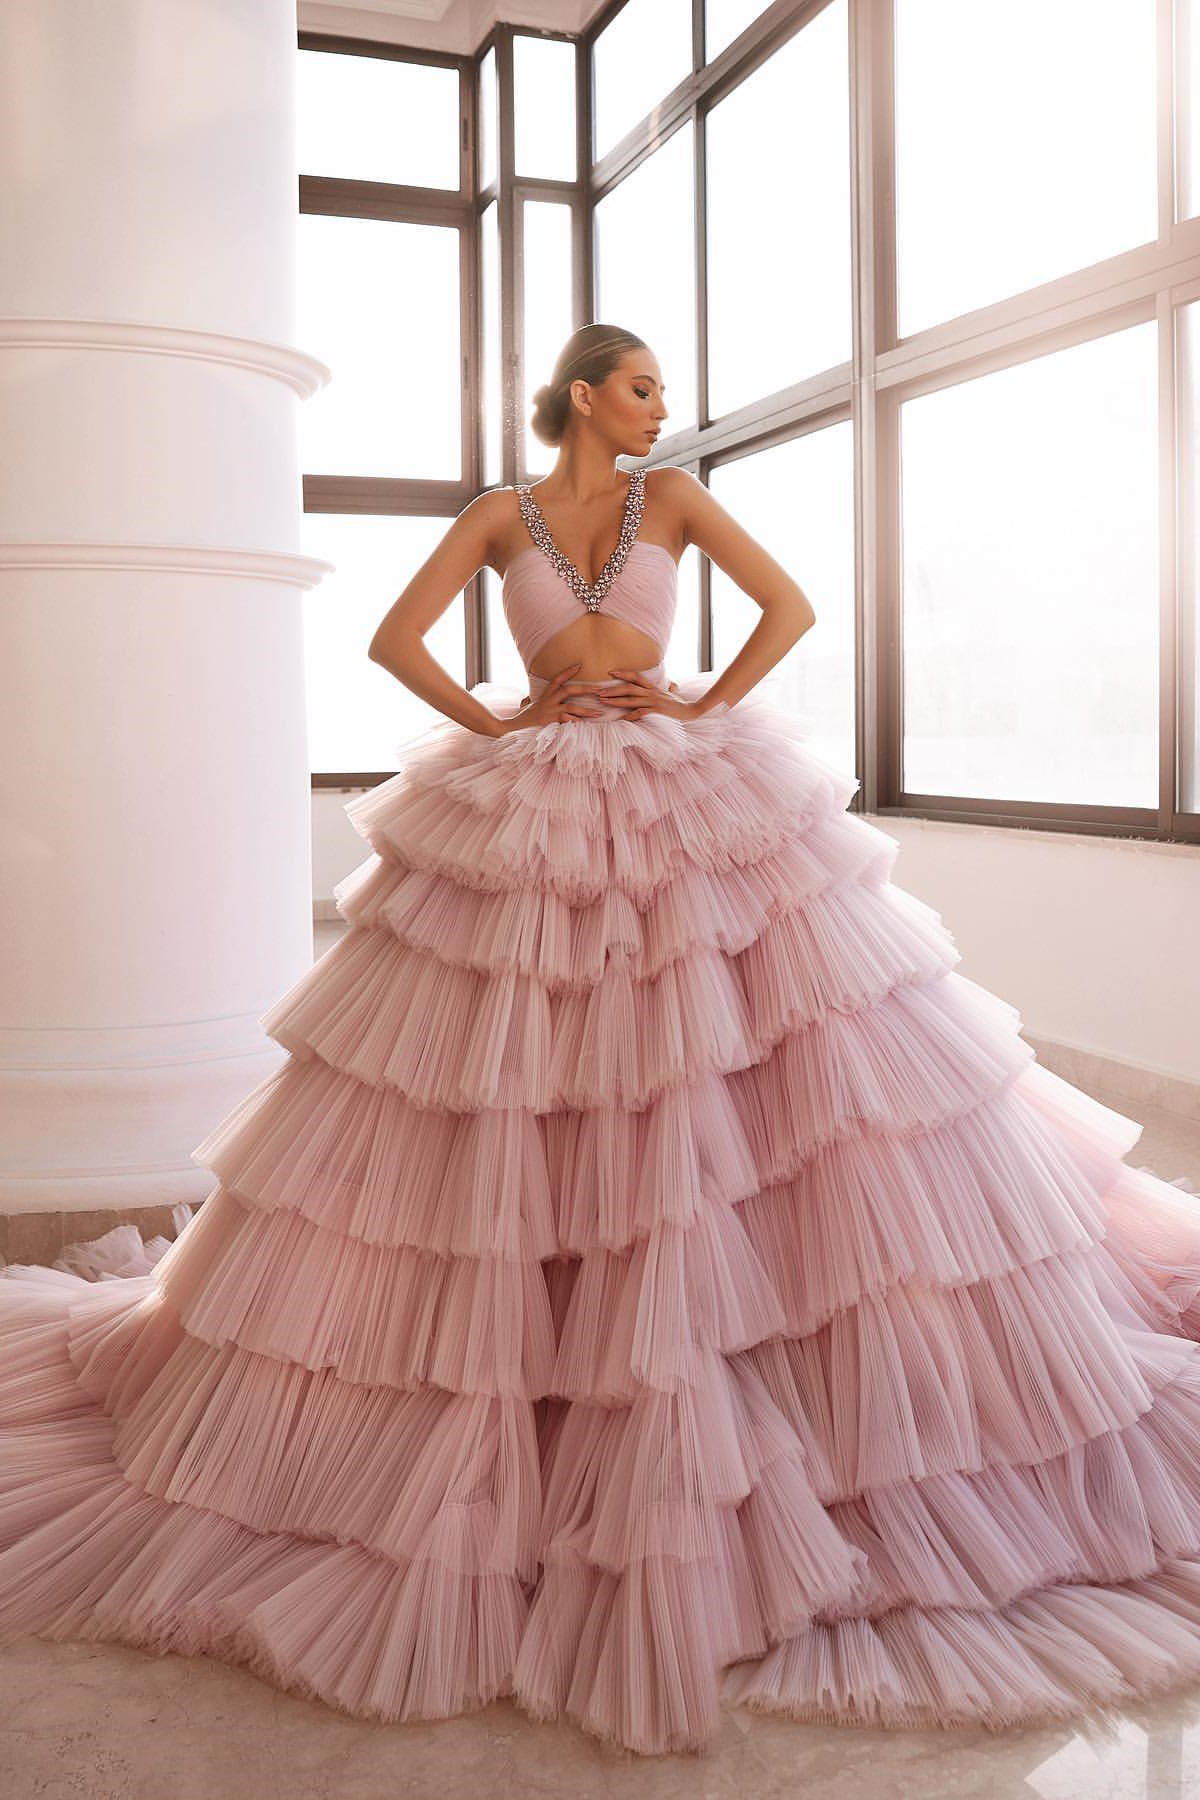 Luluslly Pink V-Neck Sleeveless Prom Dress Tulle Layered With Crystals